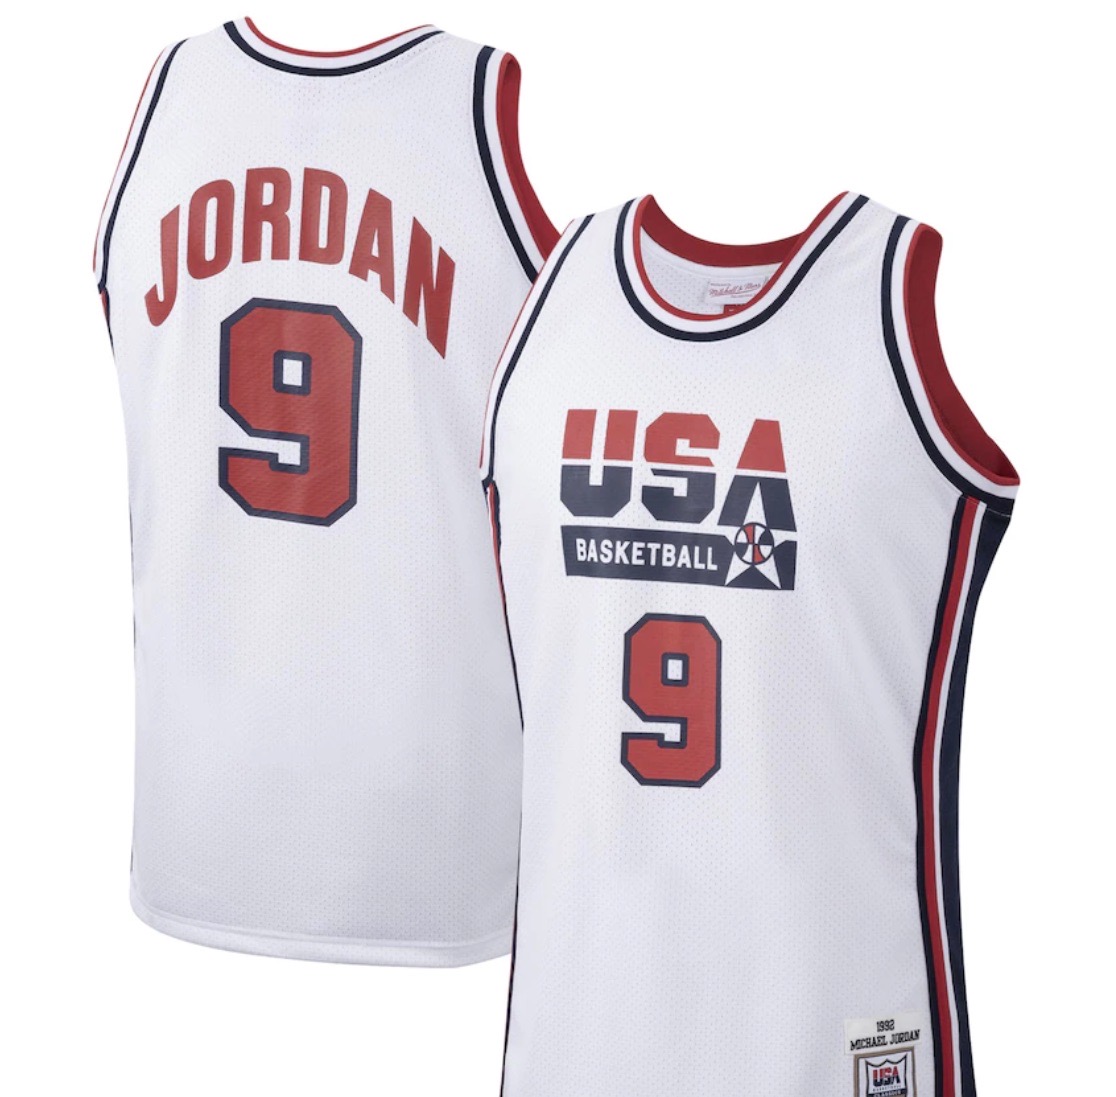 Damian Lillard Team USA Basketball jerseys one of the top-selling Olympics  items: Here's where you can buy one online 